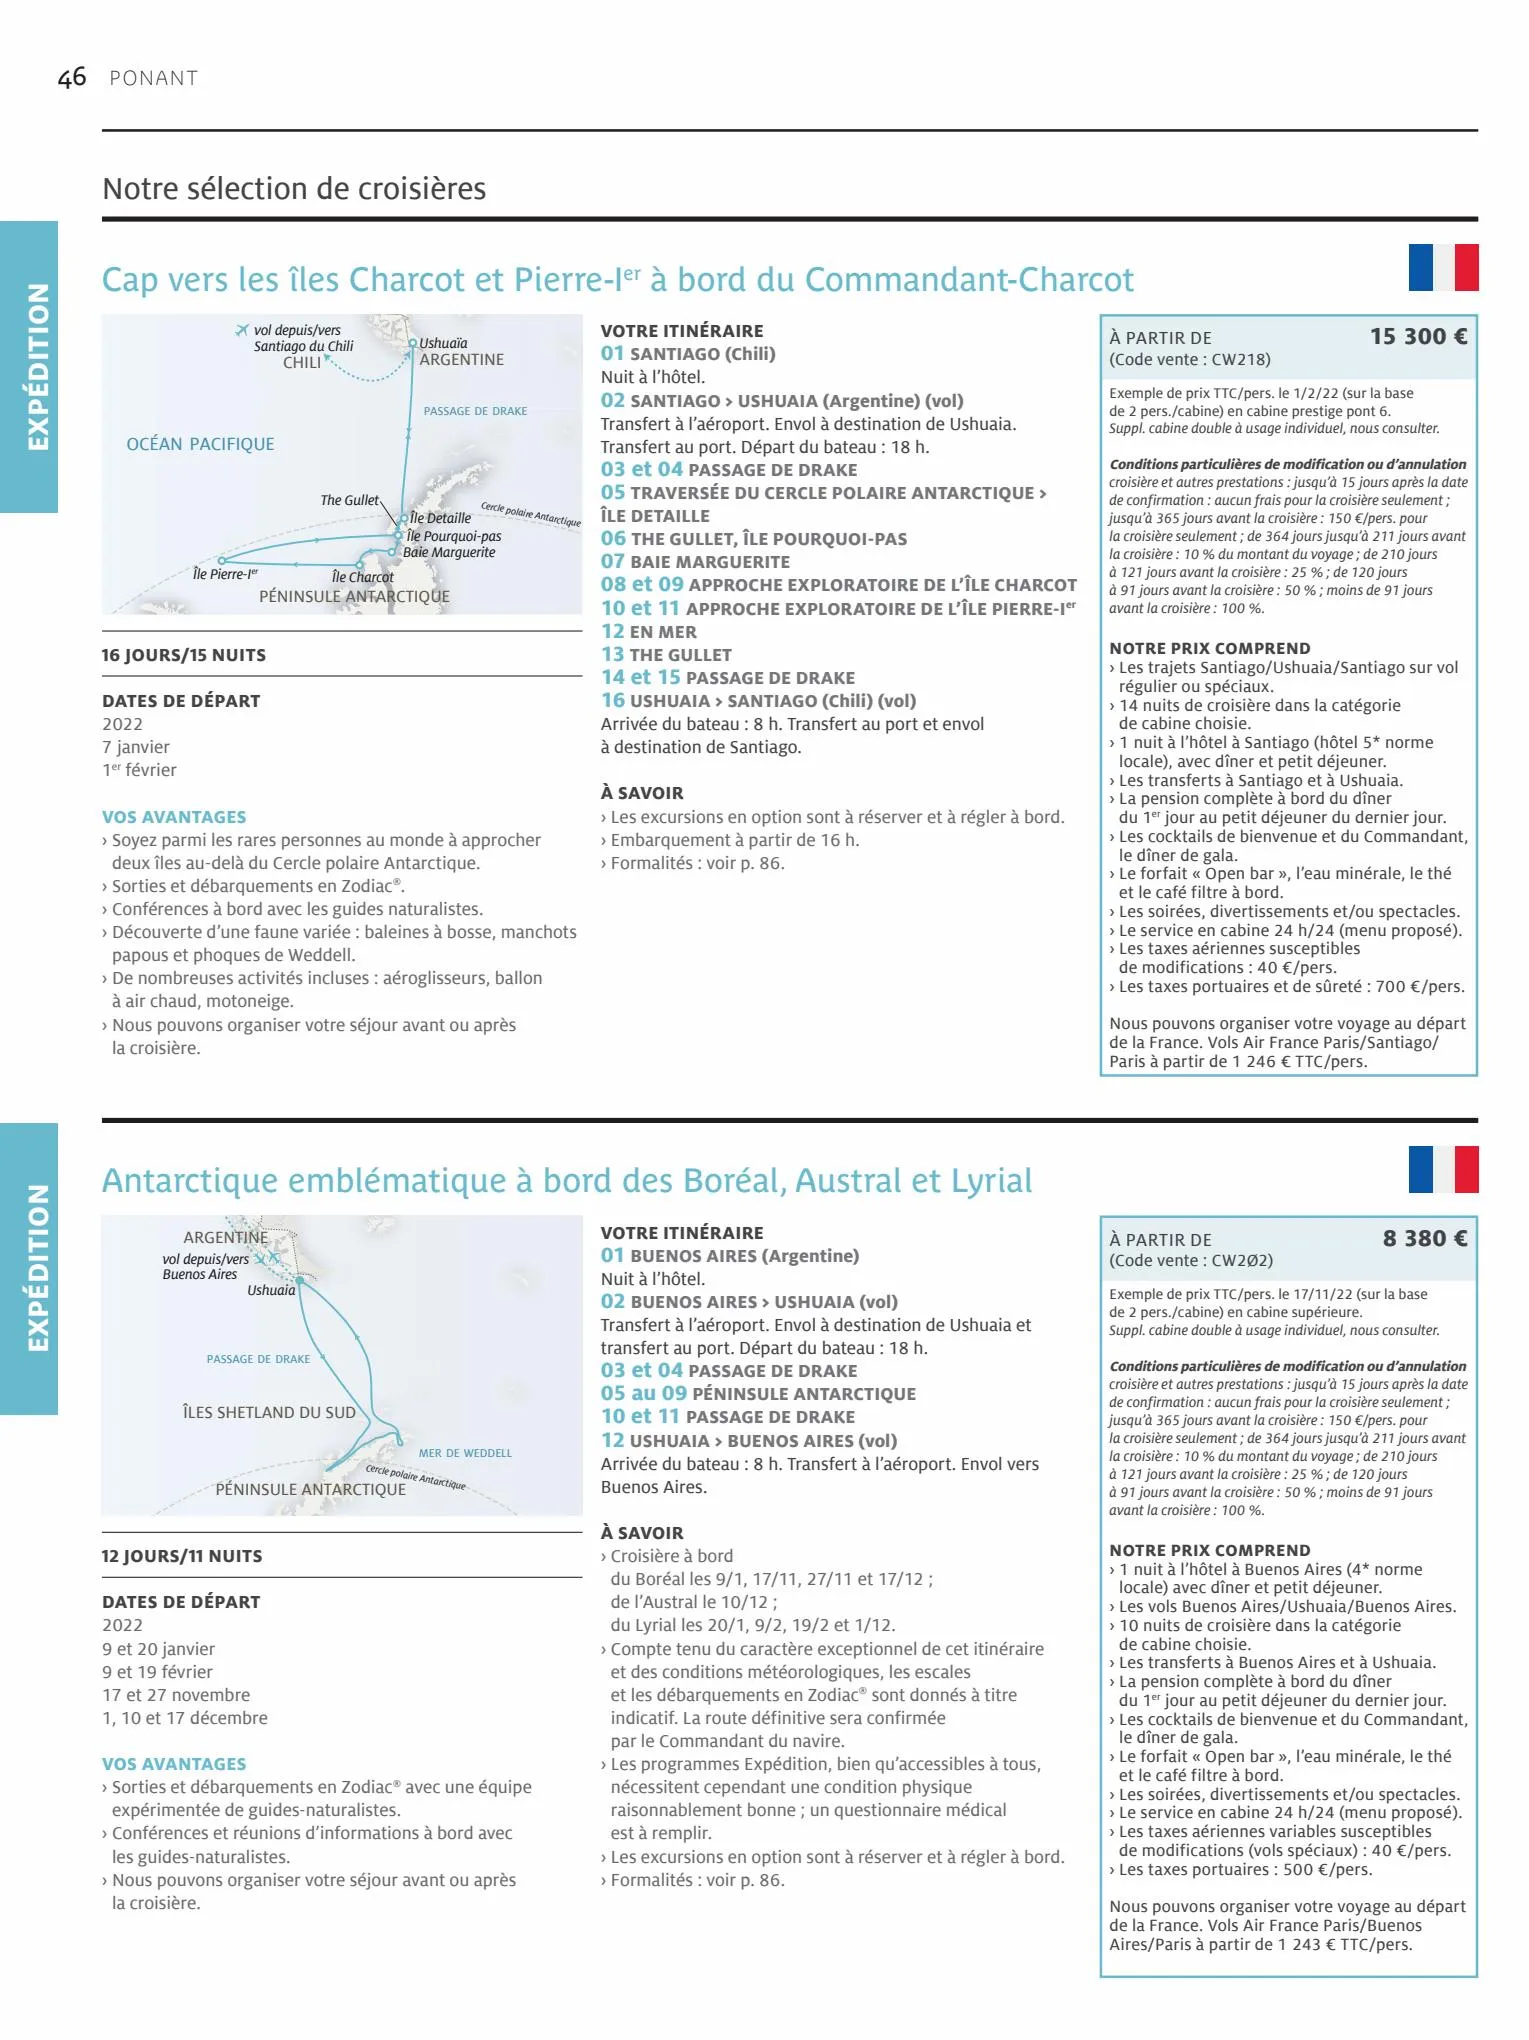 Catalogue Croisieres 2022-2023, page 00048